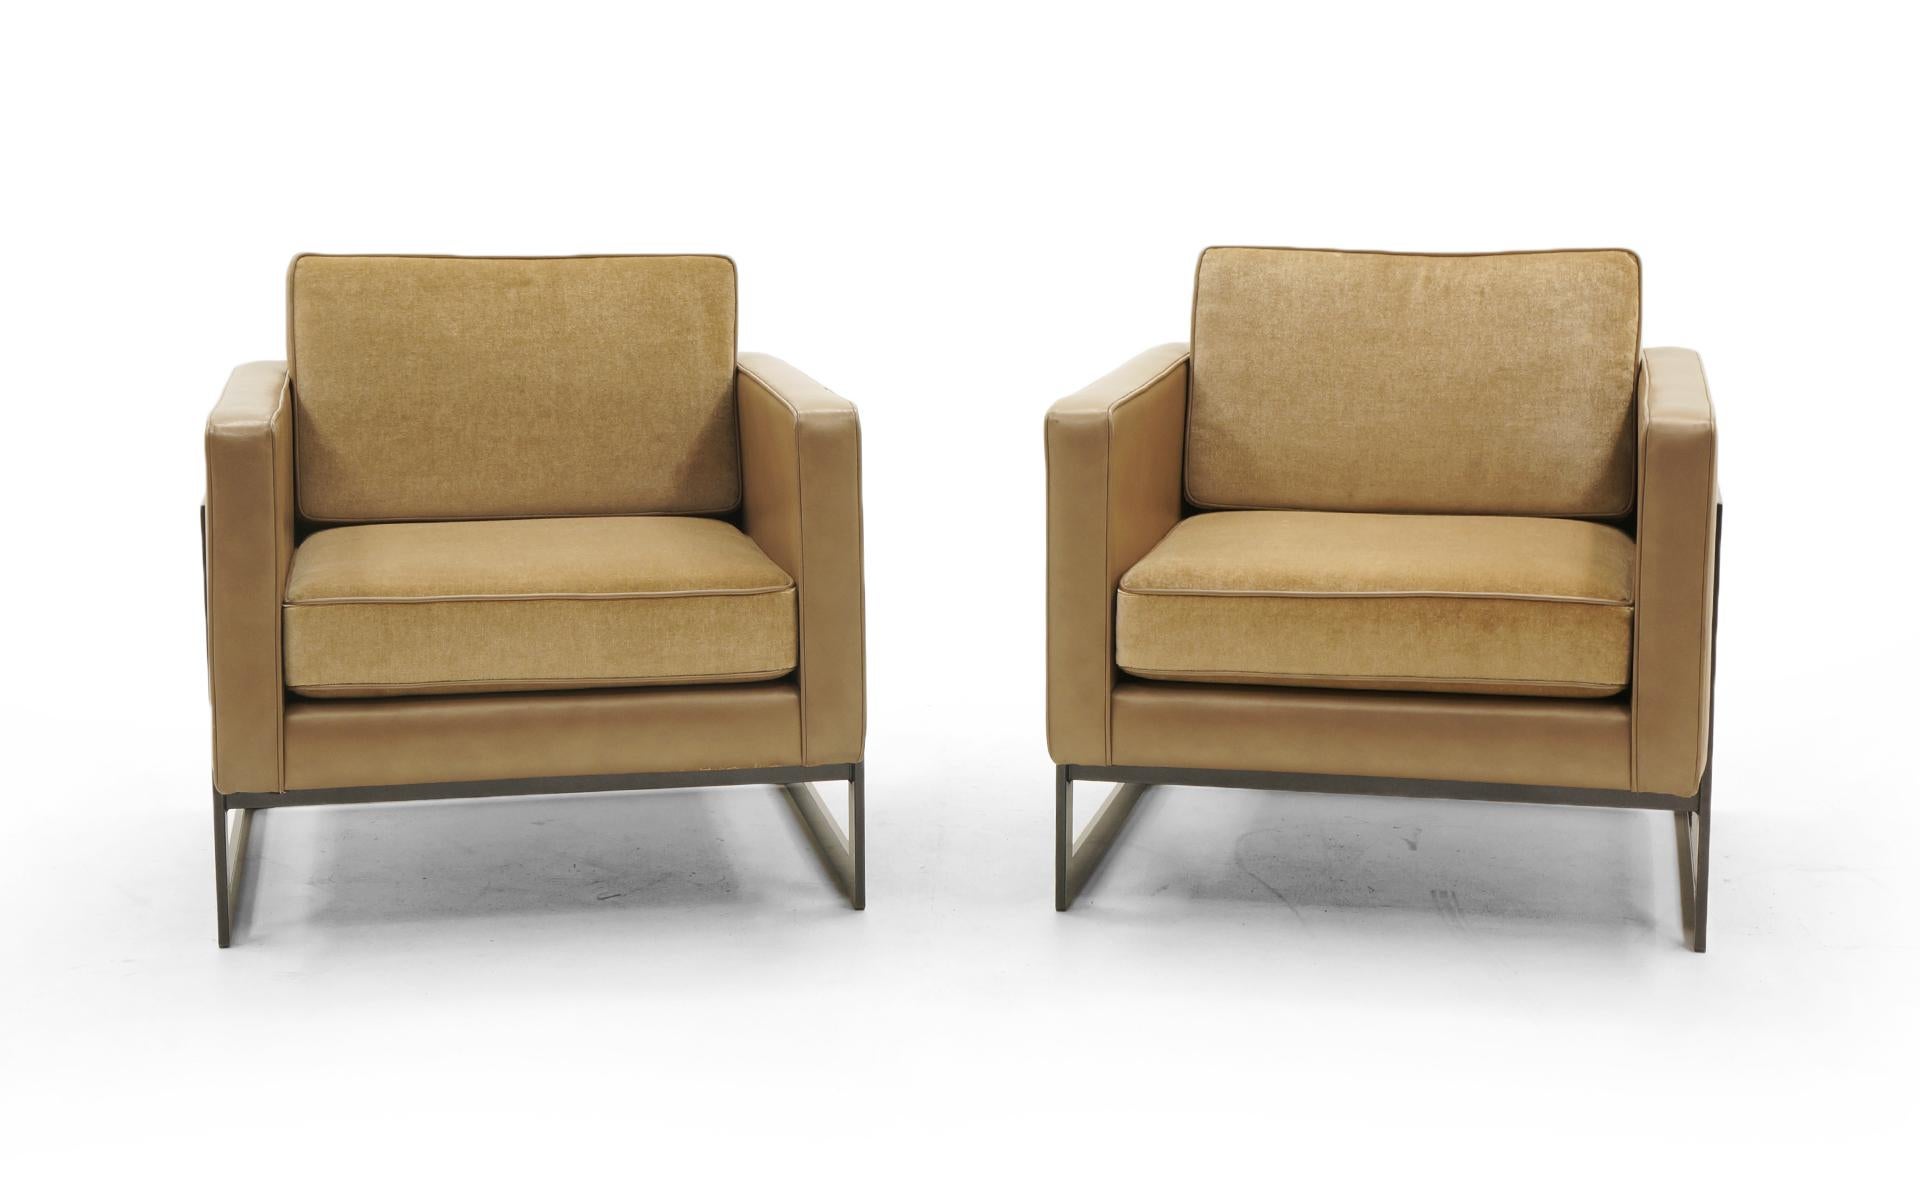 Pair of cube shaped lounge chairs by Milo Baughman for Thayer Coggin.  Reupholstered chair bodies in camel color leather and seat cushions in a matching mohair fabric.  The frames have been professionally powder coated in a dark espresso slightly